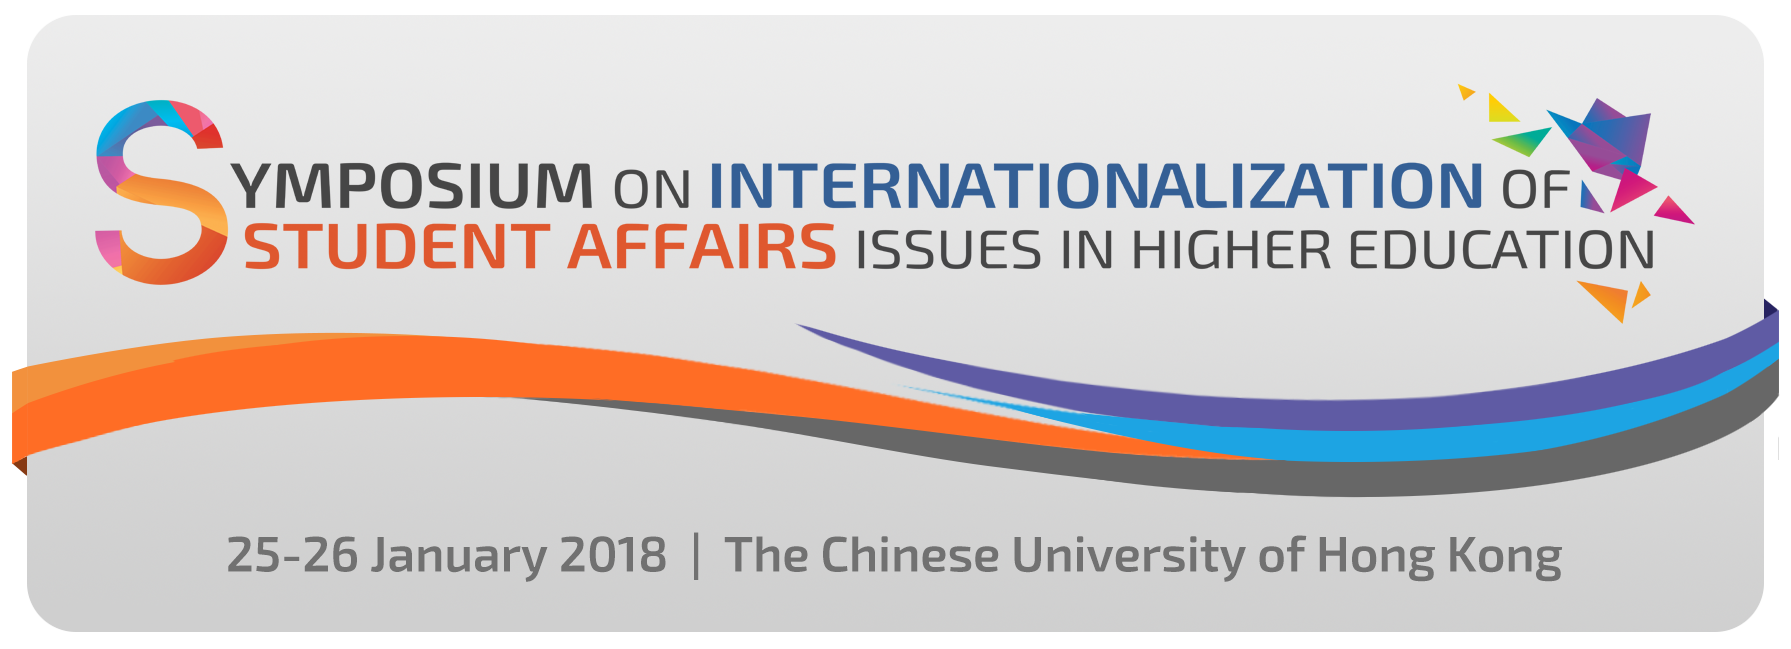 Symposium on Internationalization of Student Affairs Issues in Higher Education